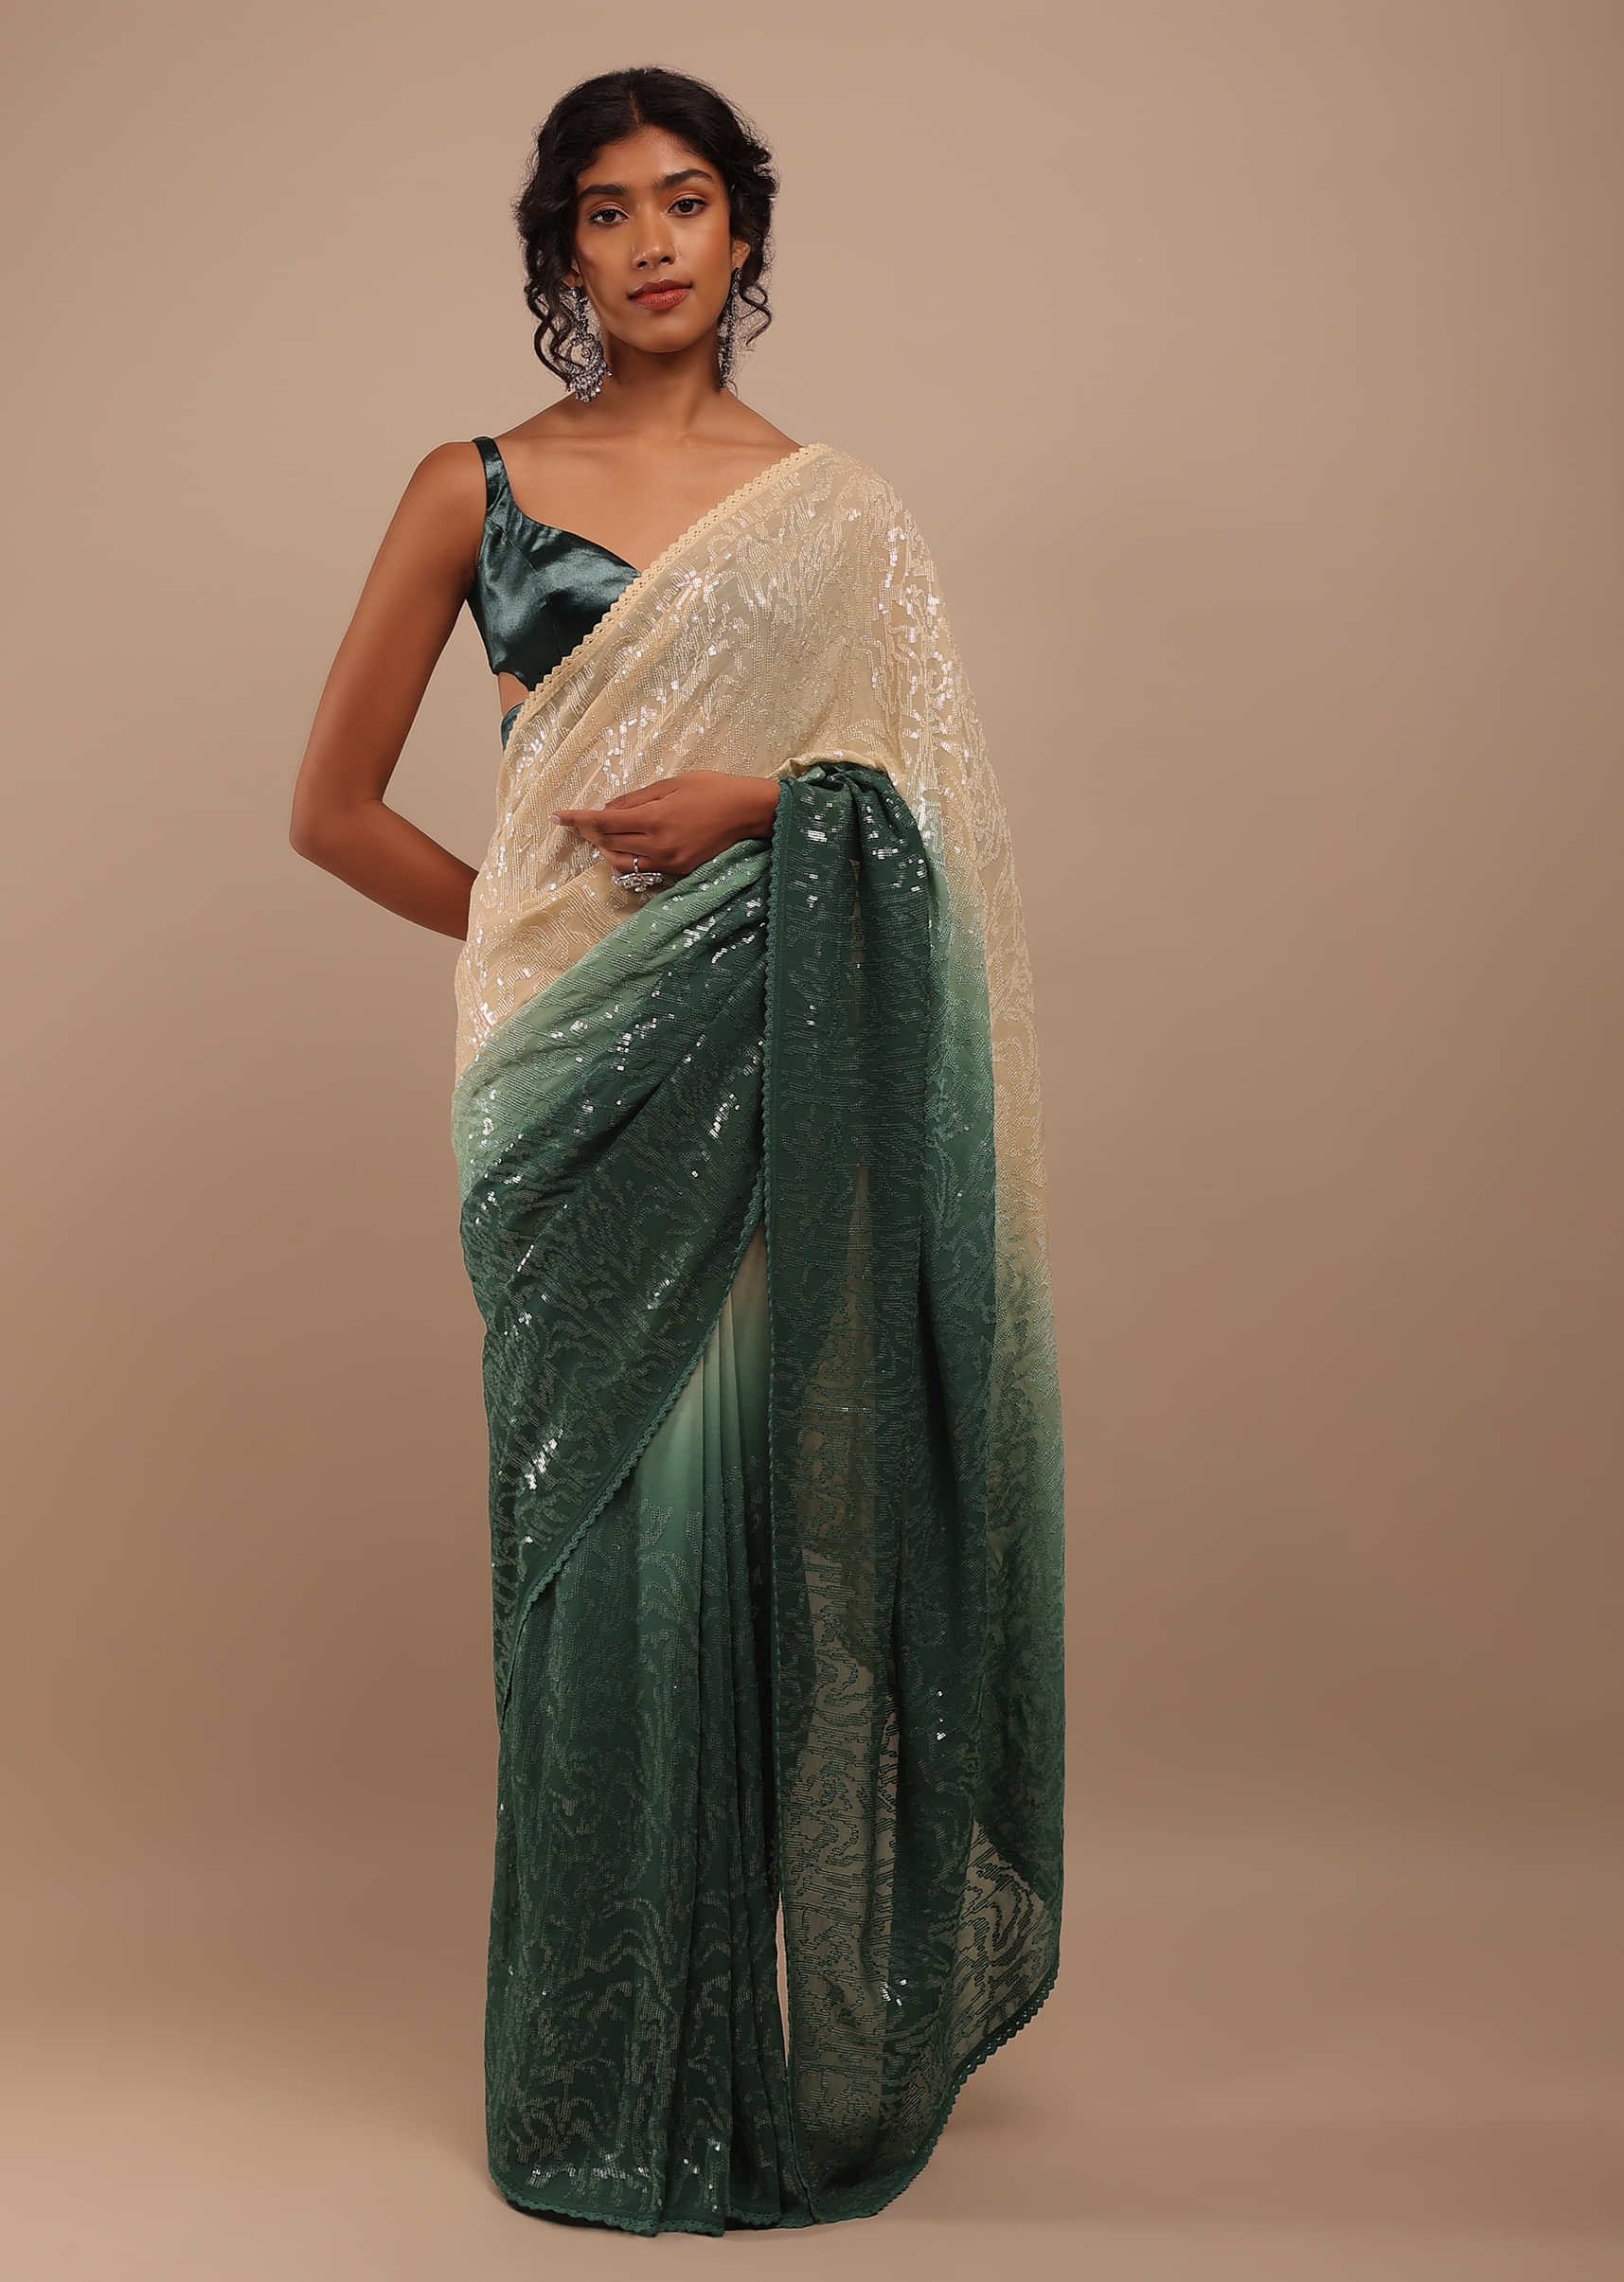 Bottle Green And Cream Ombre Sequins Embroidery Saree In A Moroccan Jaal With Lacework On The Pallu Border